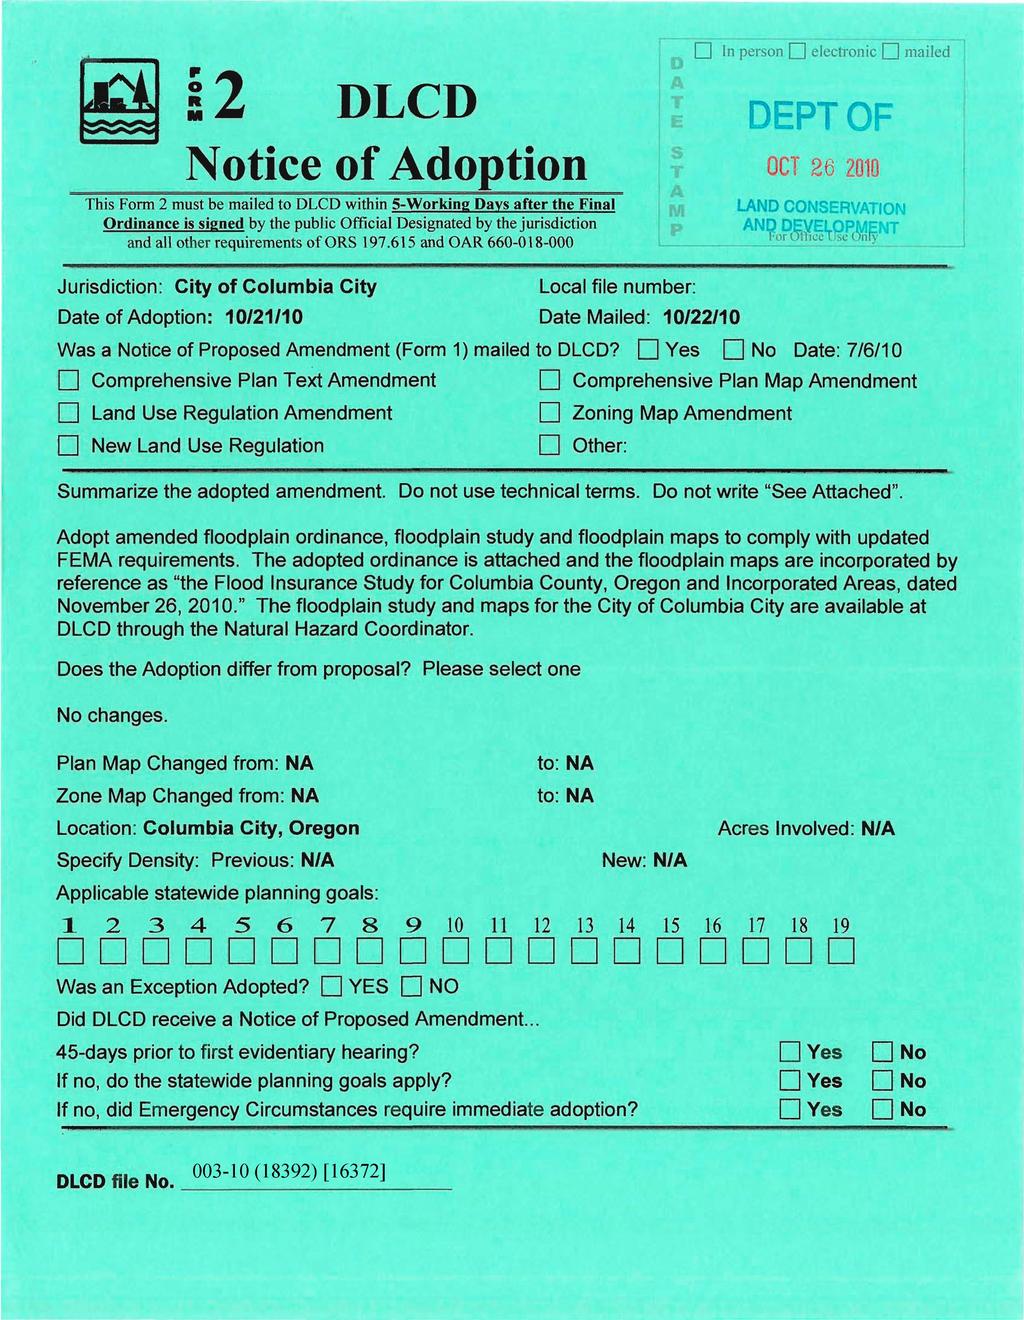 13 12 DLCD Notice of Adoption O In person Q electronic I mailed DEPT OF OCT 26 2010 This Form 2 must be mailed to DLCD within 5-Working Days after the Final Ordinance is signed by the public Official